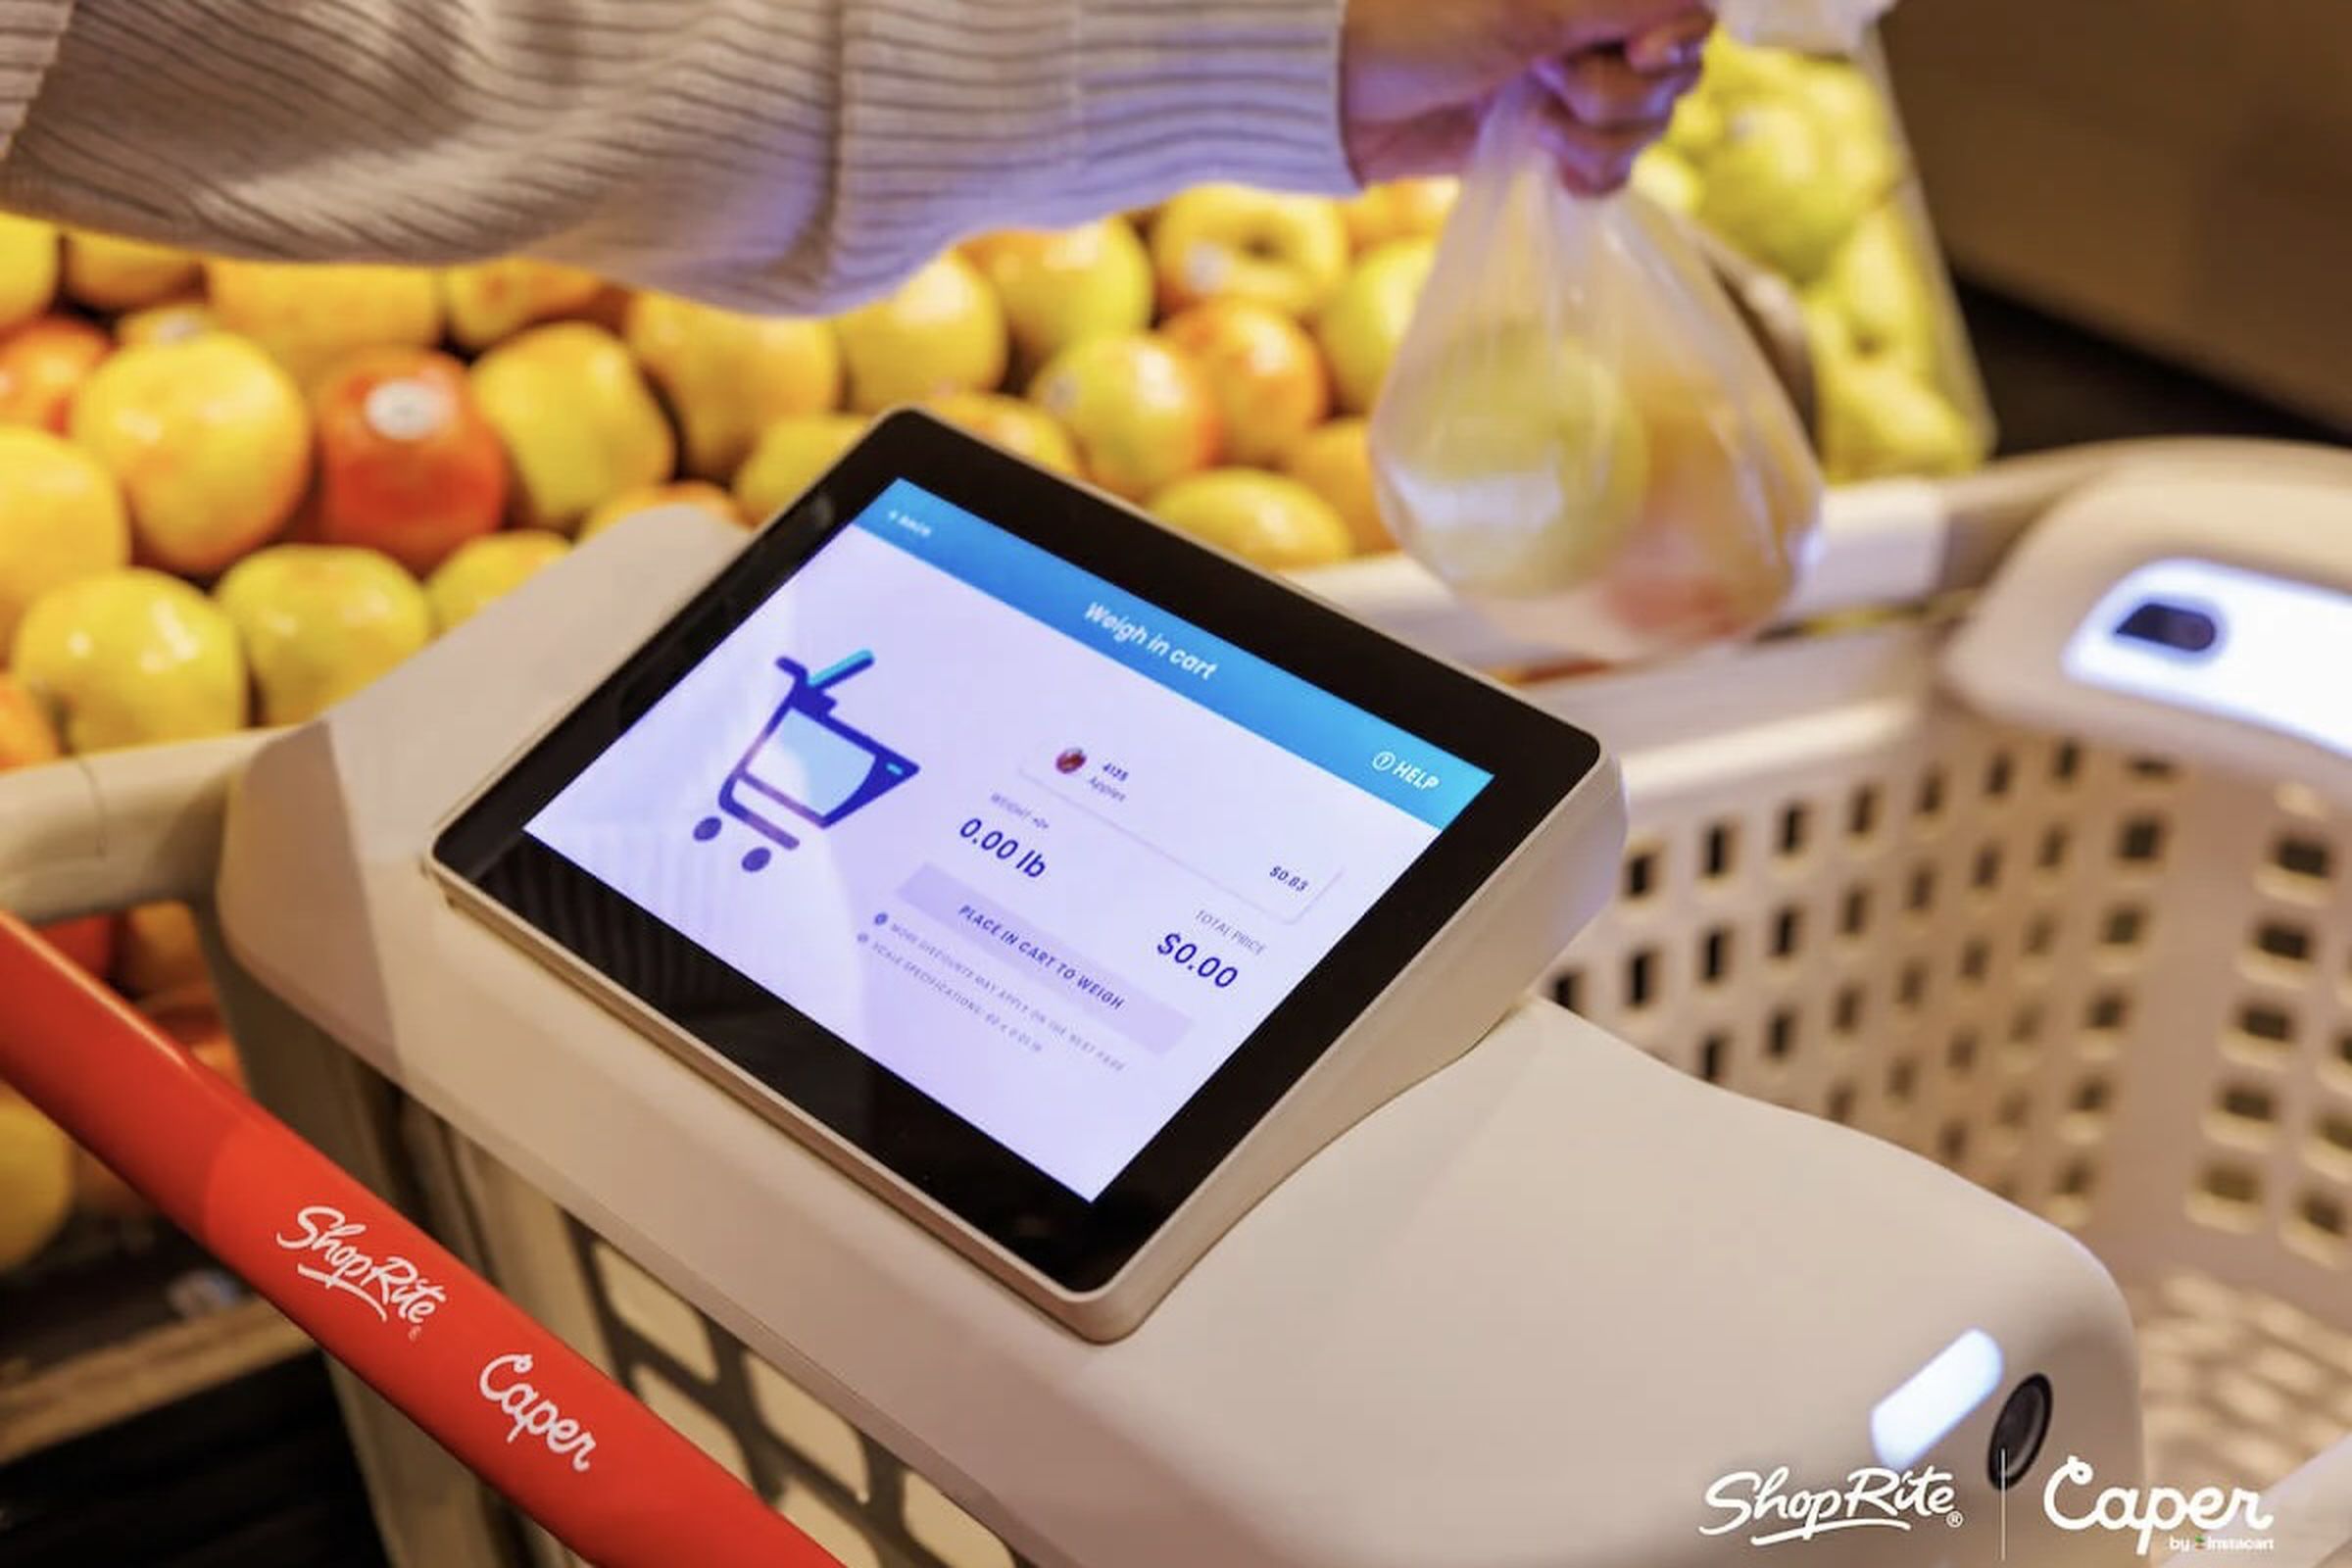 grocery cart with a tablet build onto it as a person lowers a bag of produce that will be weighed automatically by the cart